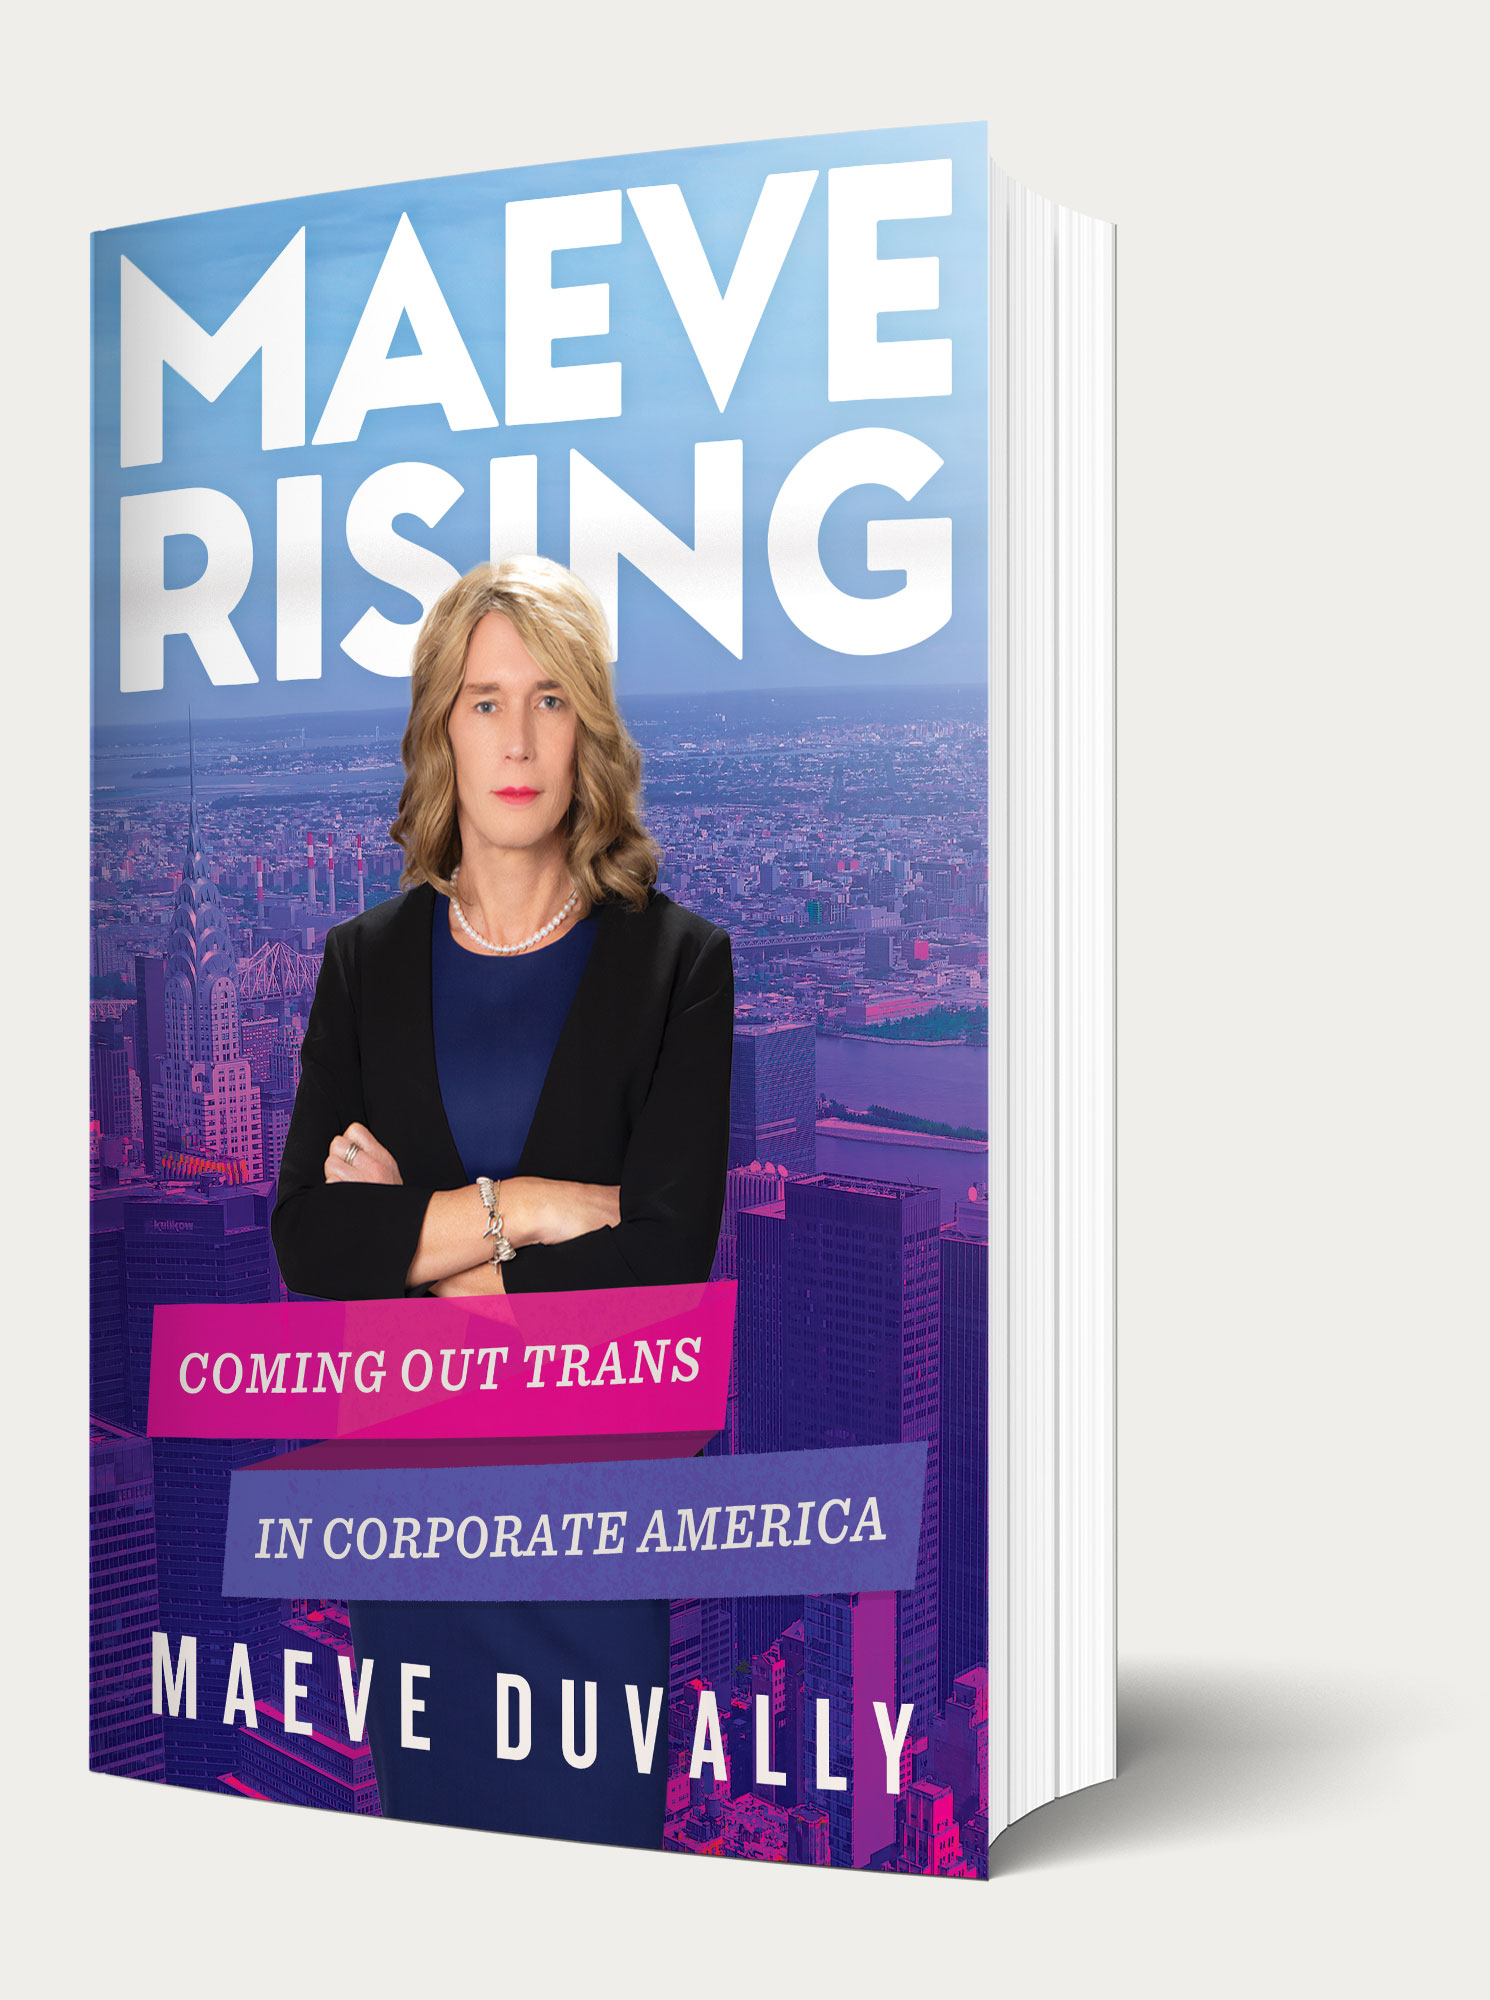 Maeve Rising Cover